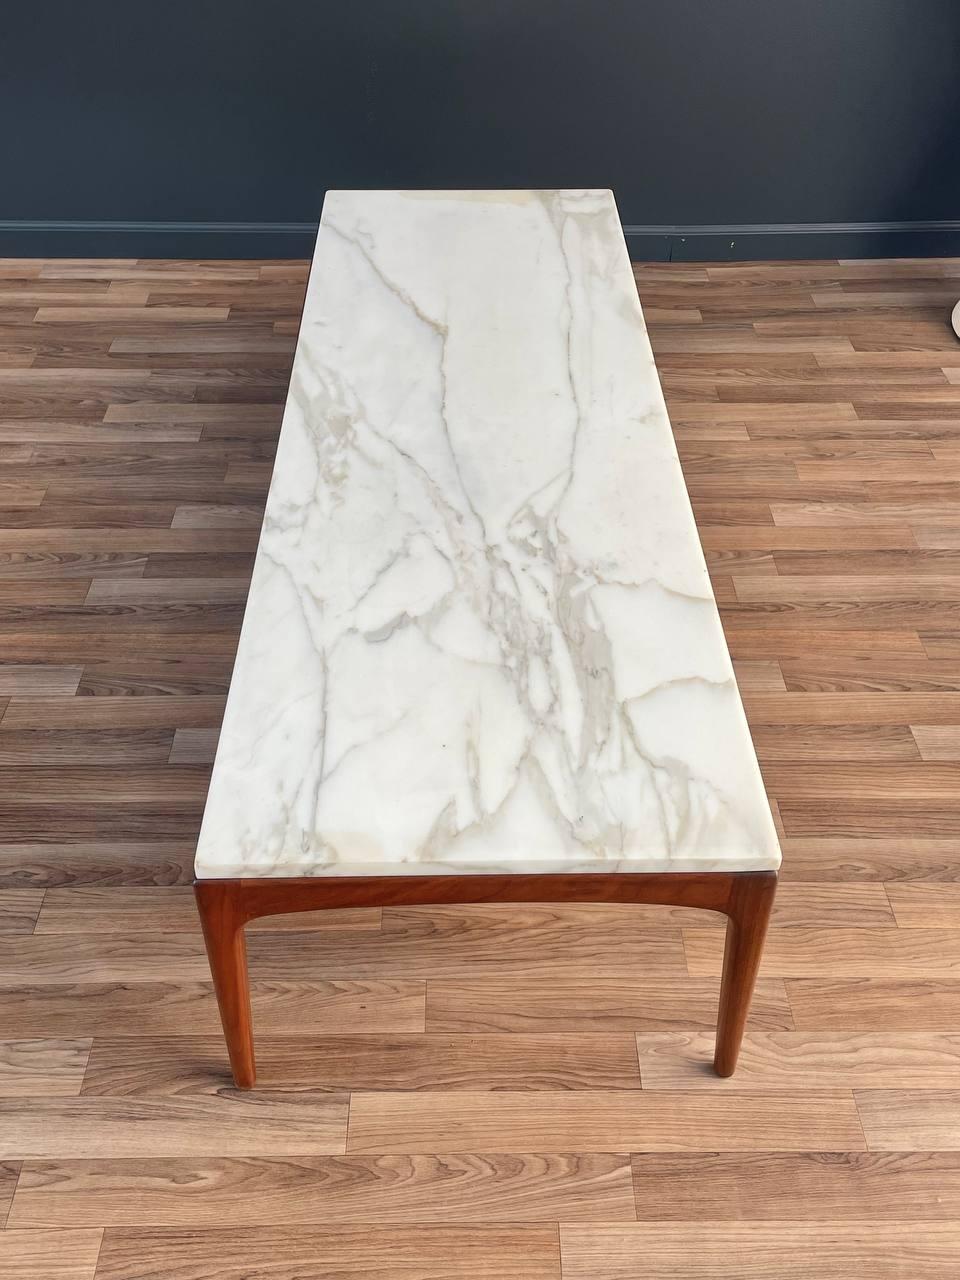 Newly Refinished - Mid-Century Modern Marble & Walnut Coffee Table by Lane 2